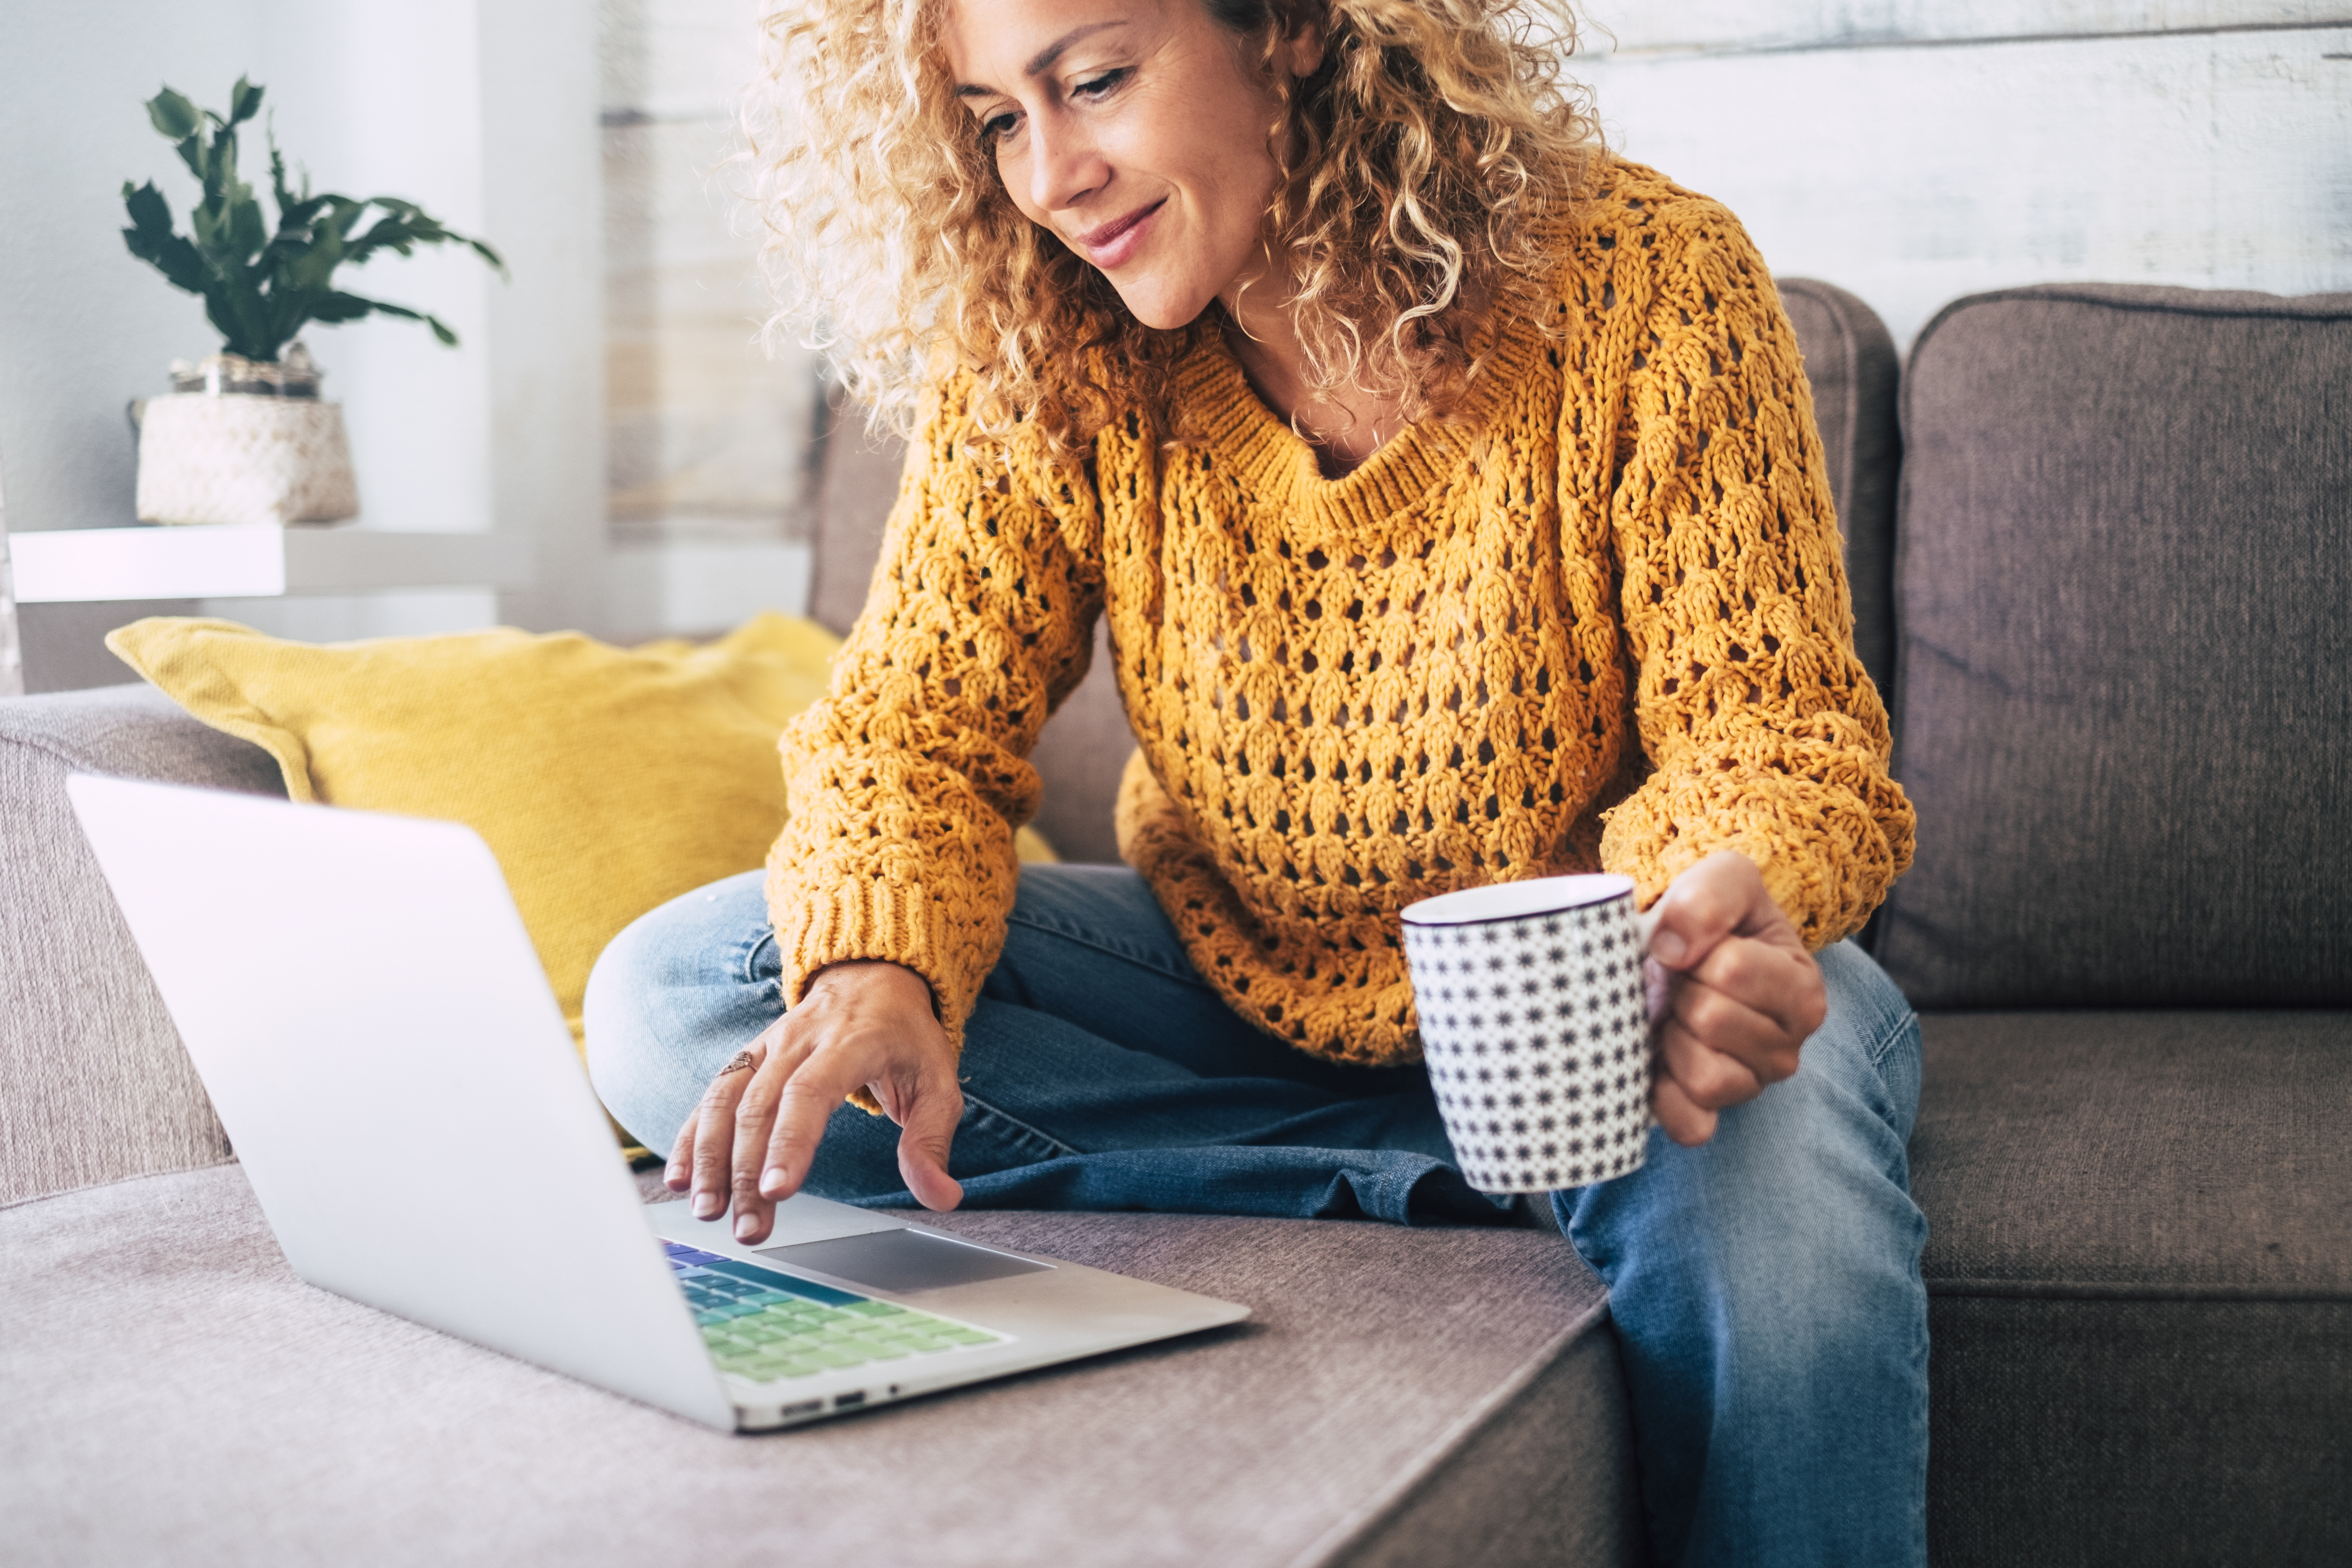 A curly-haired female real estate investor in a yellow sweater holding a coffee mug and looking at a laptop.